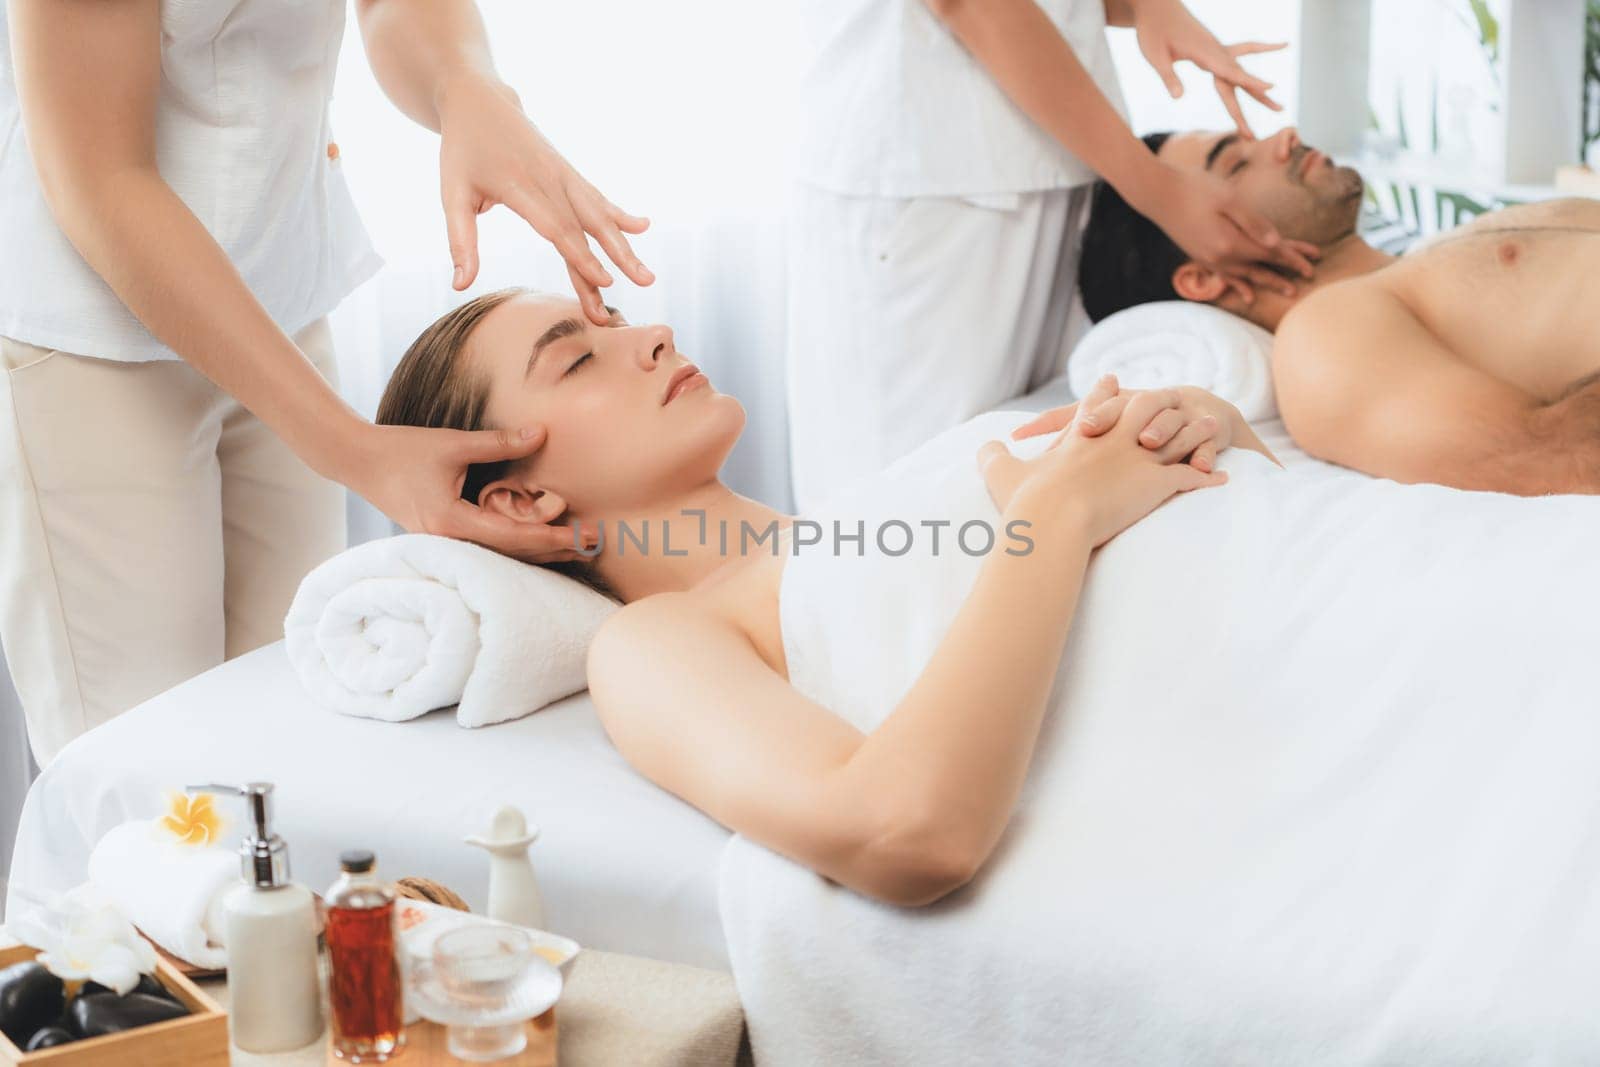 Caucasian couple enjoying relaxing anti-stress head massage. Quiescent by biancoblue